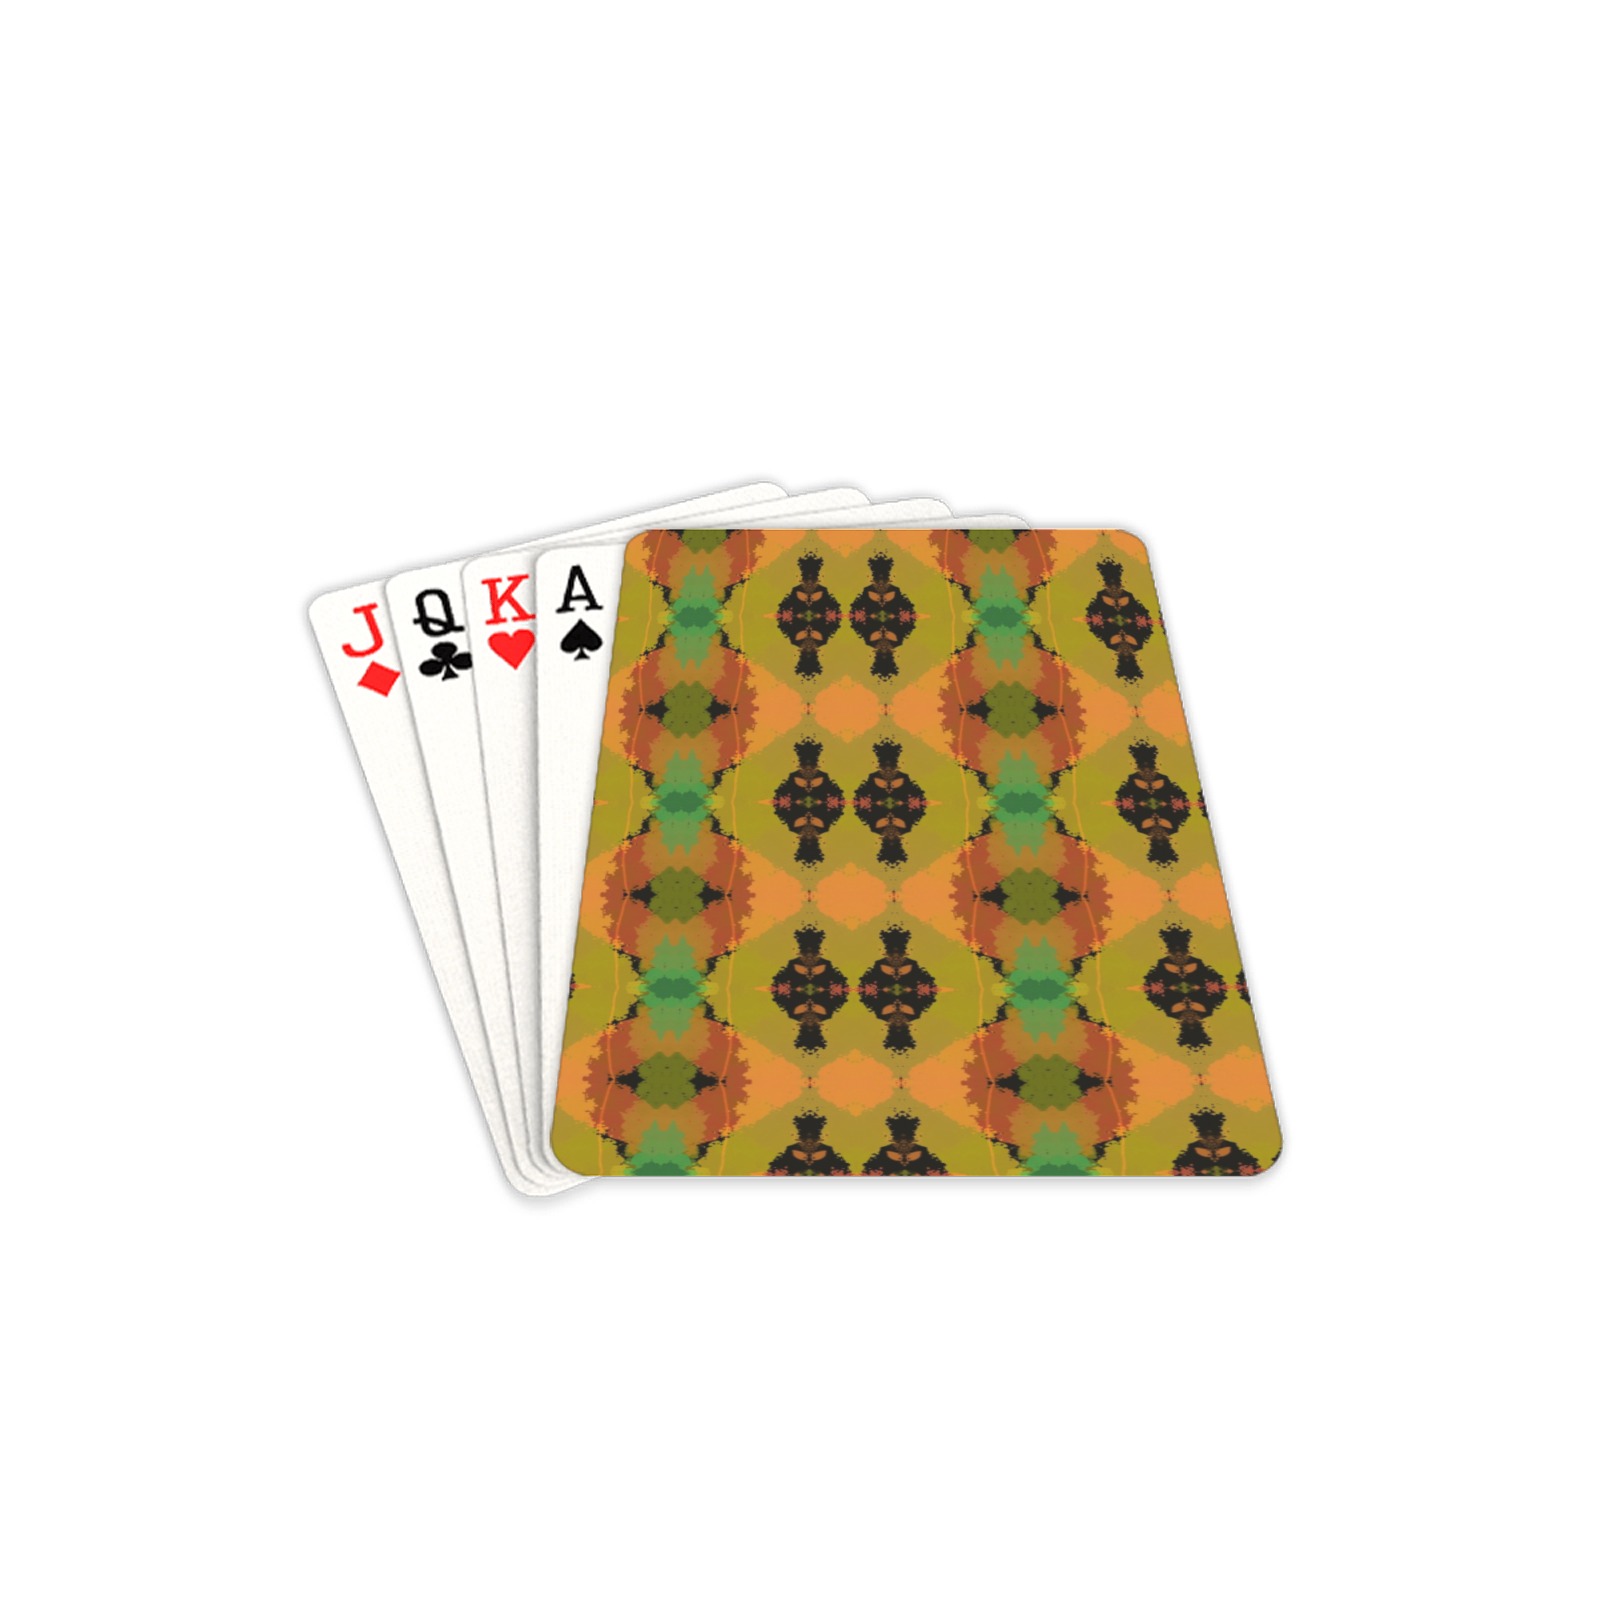 Tribal inspired pattern Playing Cards 2.5"x3.5"